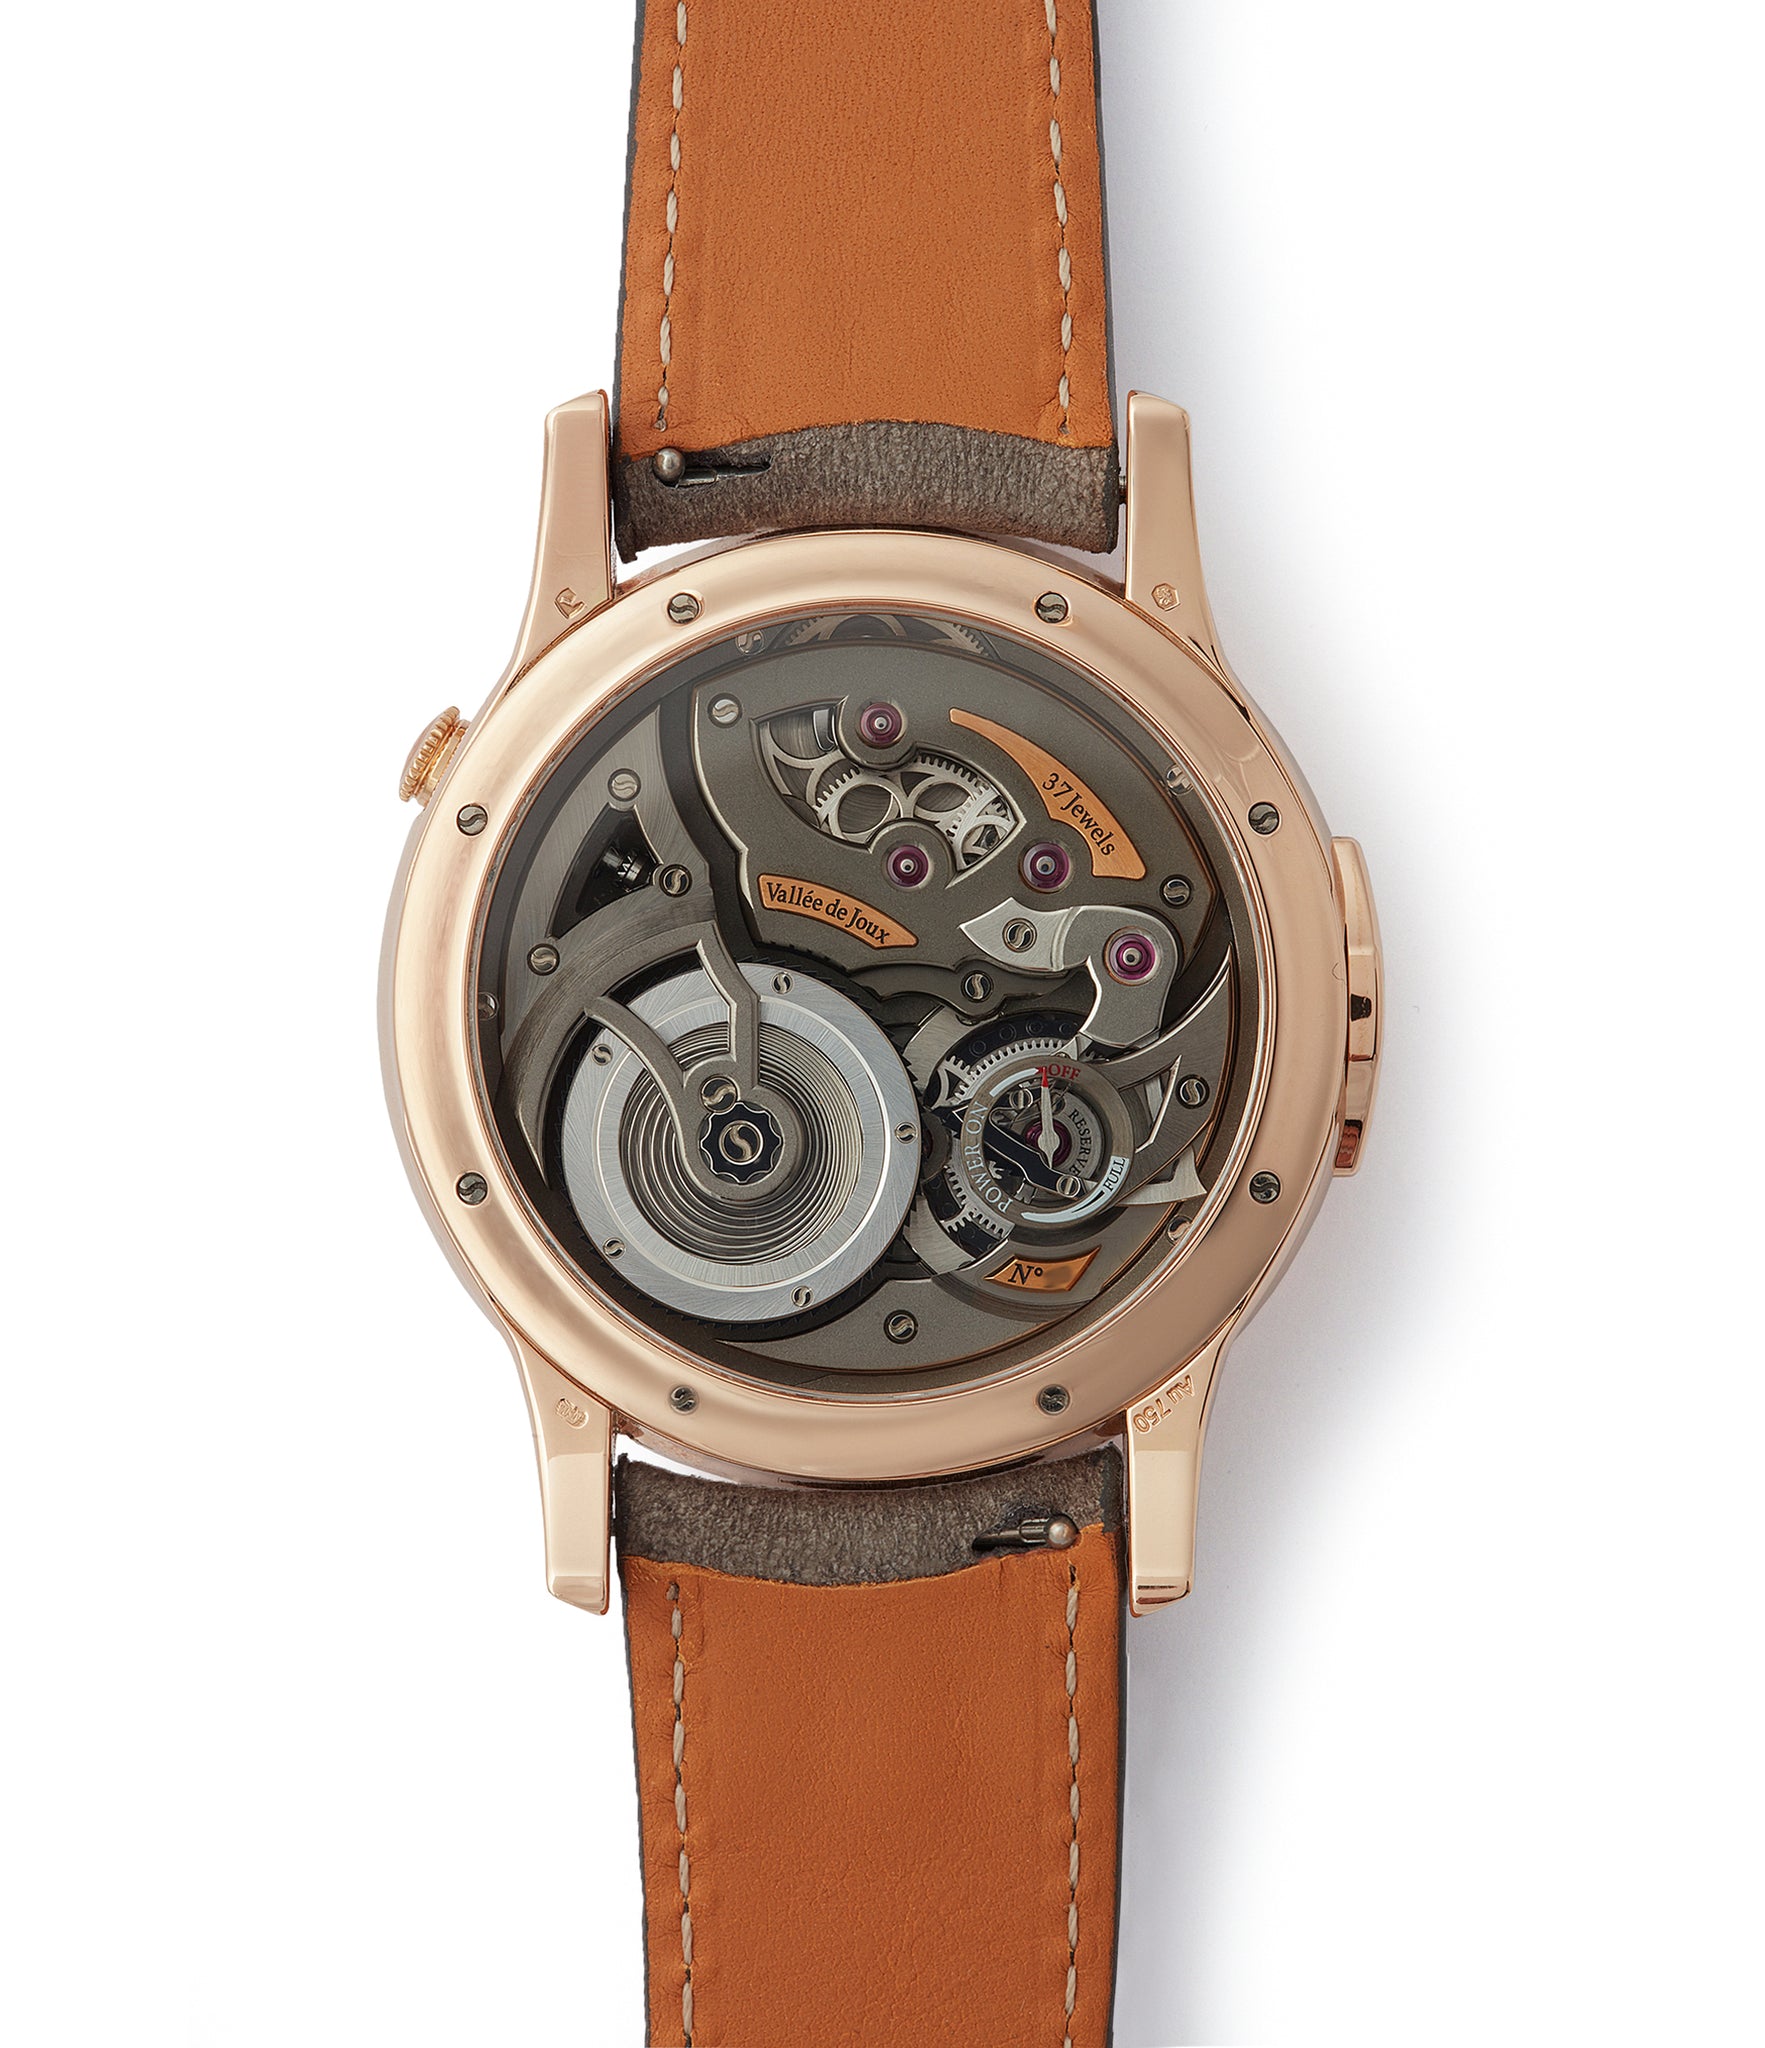 pink gold Romain Gauthier Logical One red gold dress watch by independent watchmaker for sale online at A Collected Man London UK specialist of rare watches